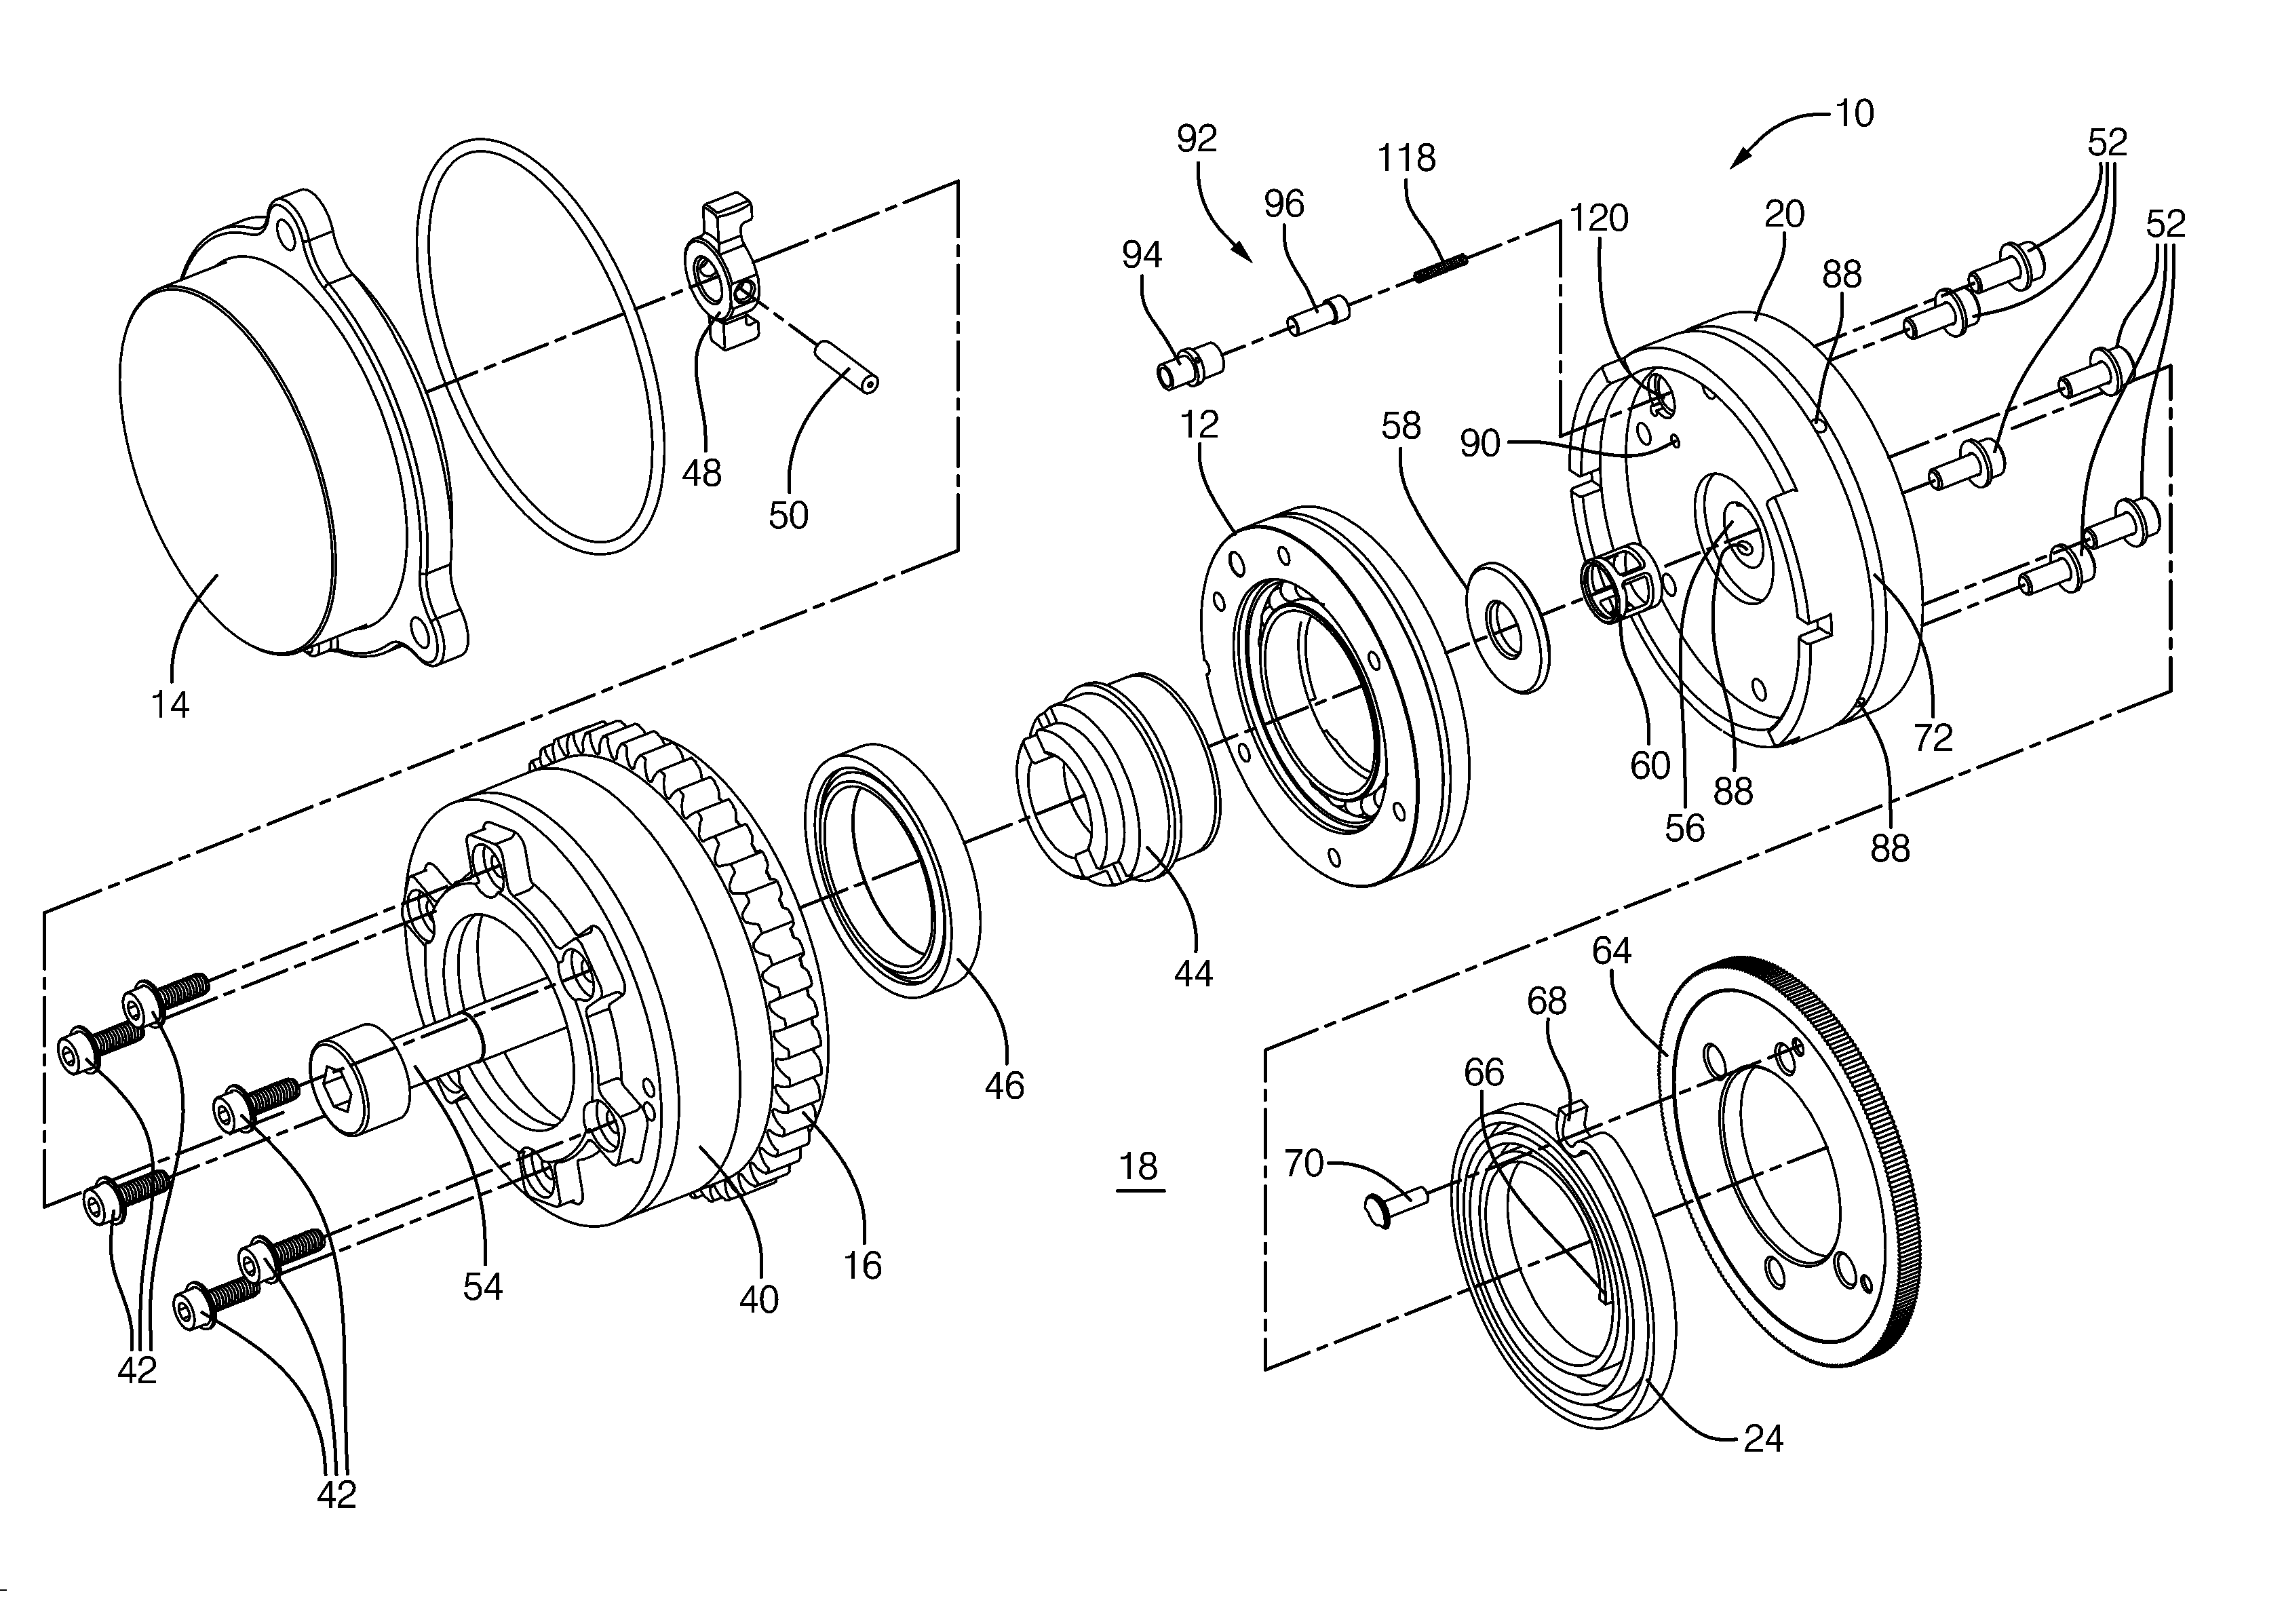 Harmonic Drive Camshaft Phaser with Lock Pin for Selectivley Preventing a Change in Phase Relationship